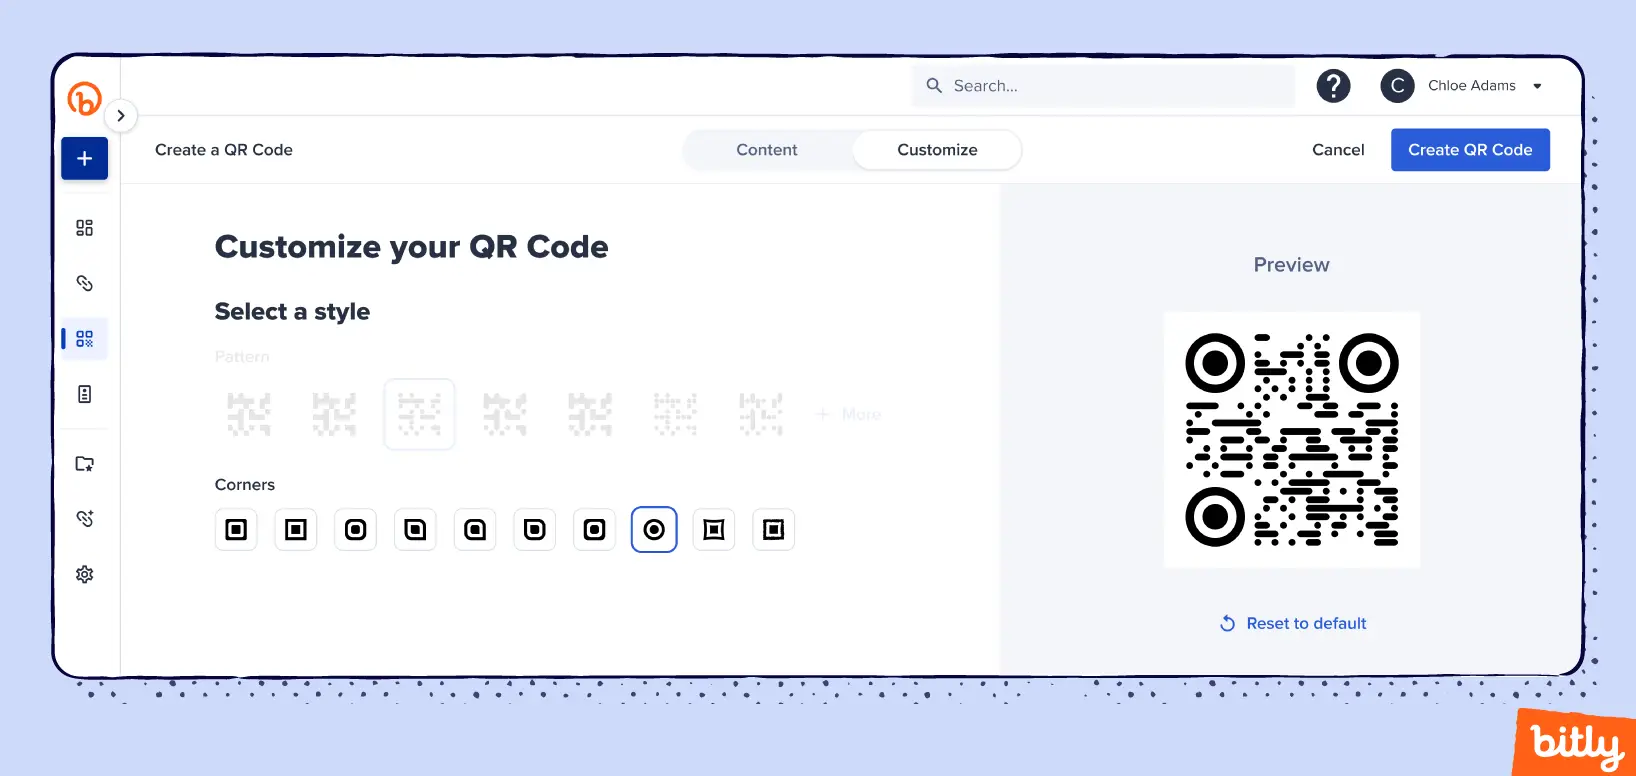 The QR Code pattern options in the Bitly Connections Platform.